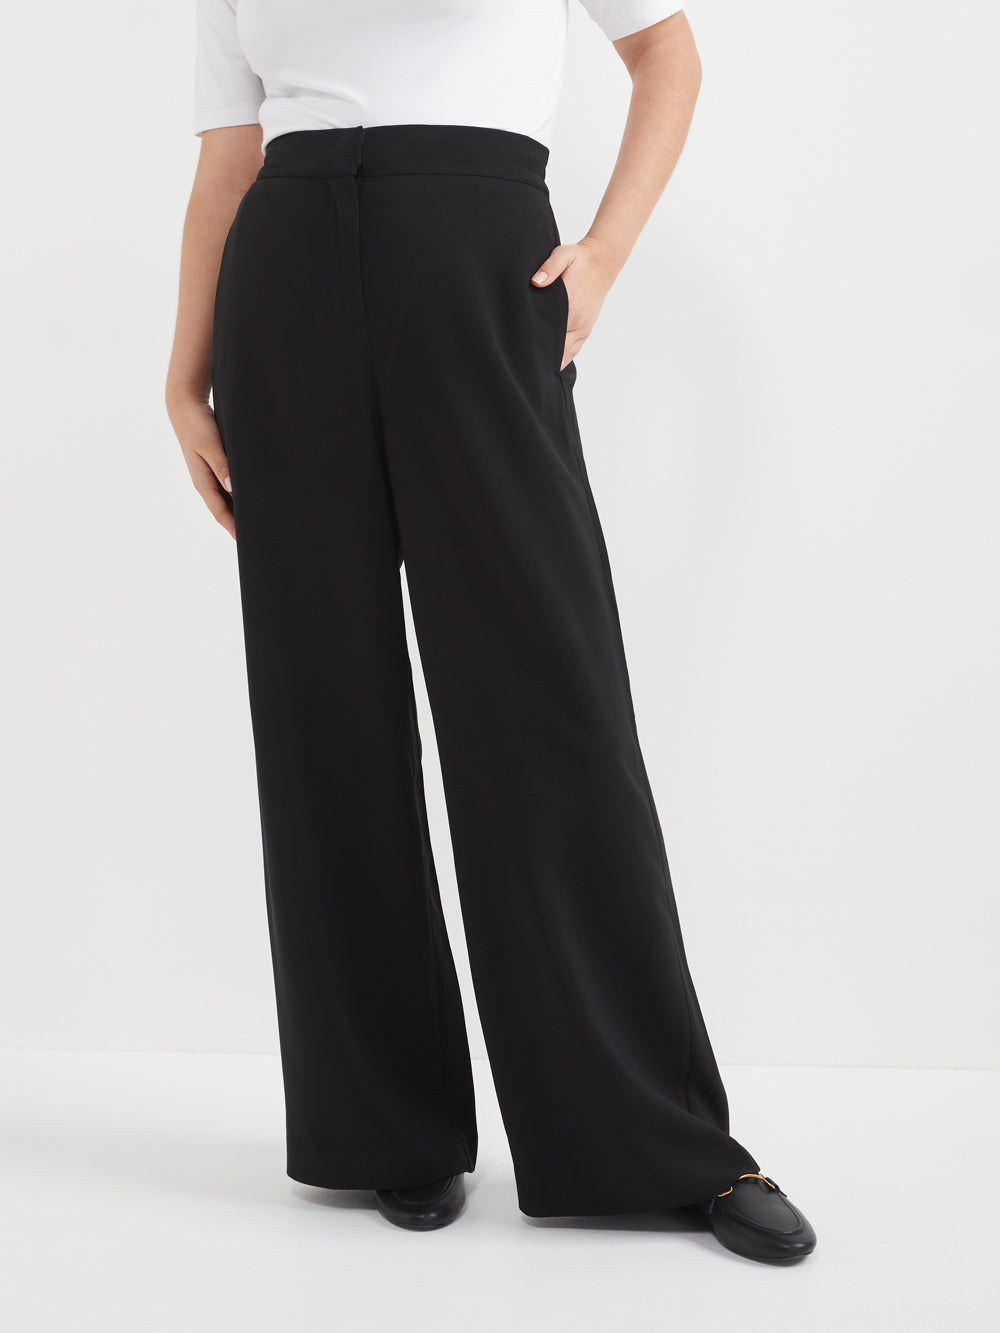 The Stretch Crepe Draped Trouser